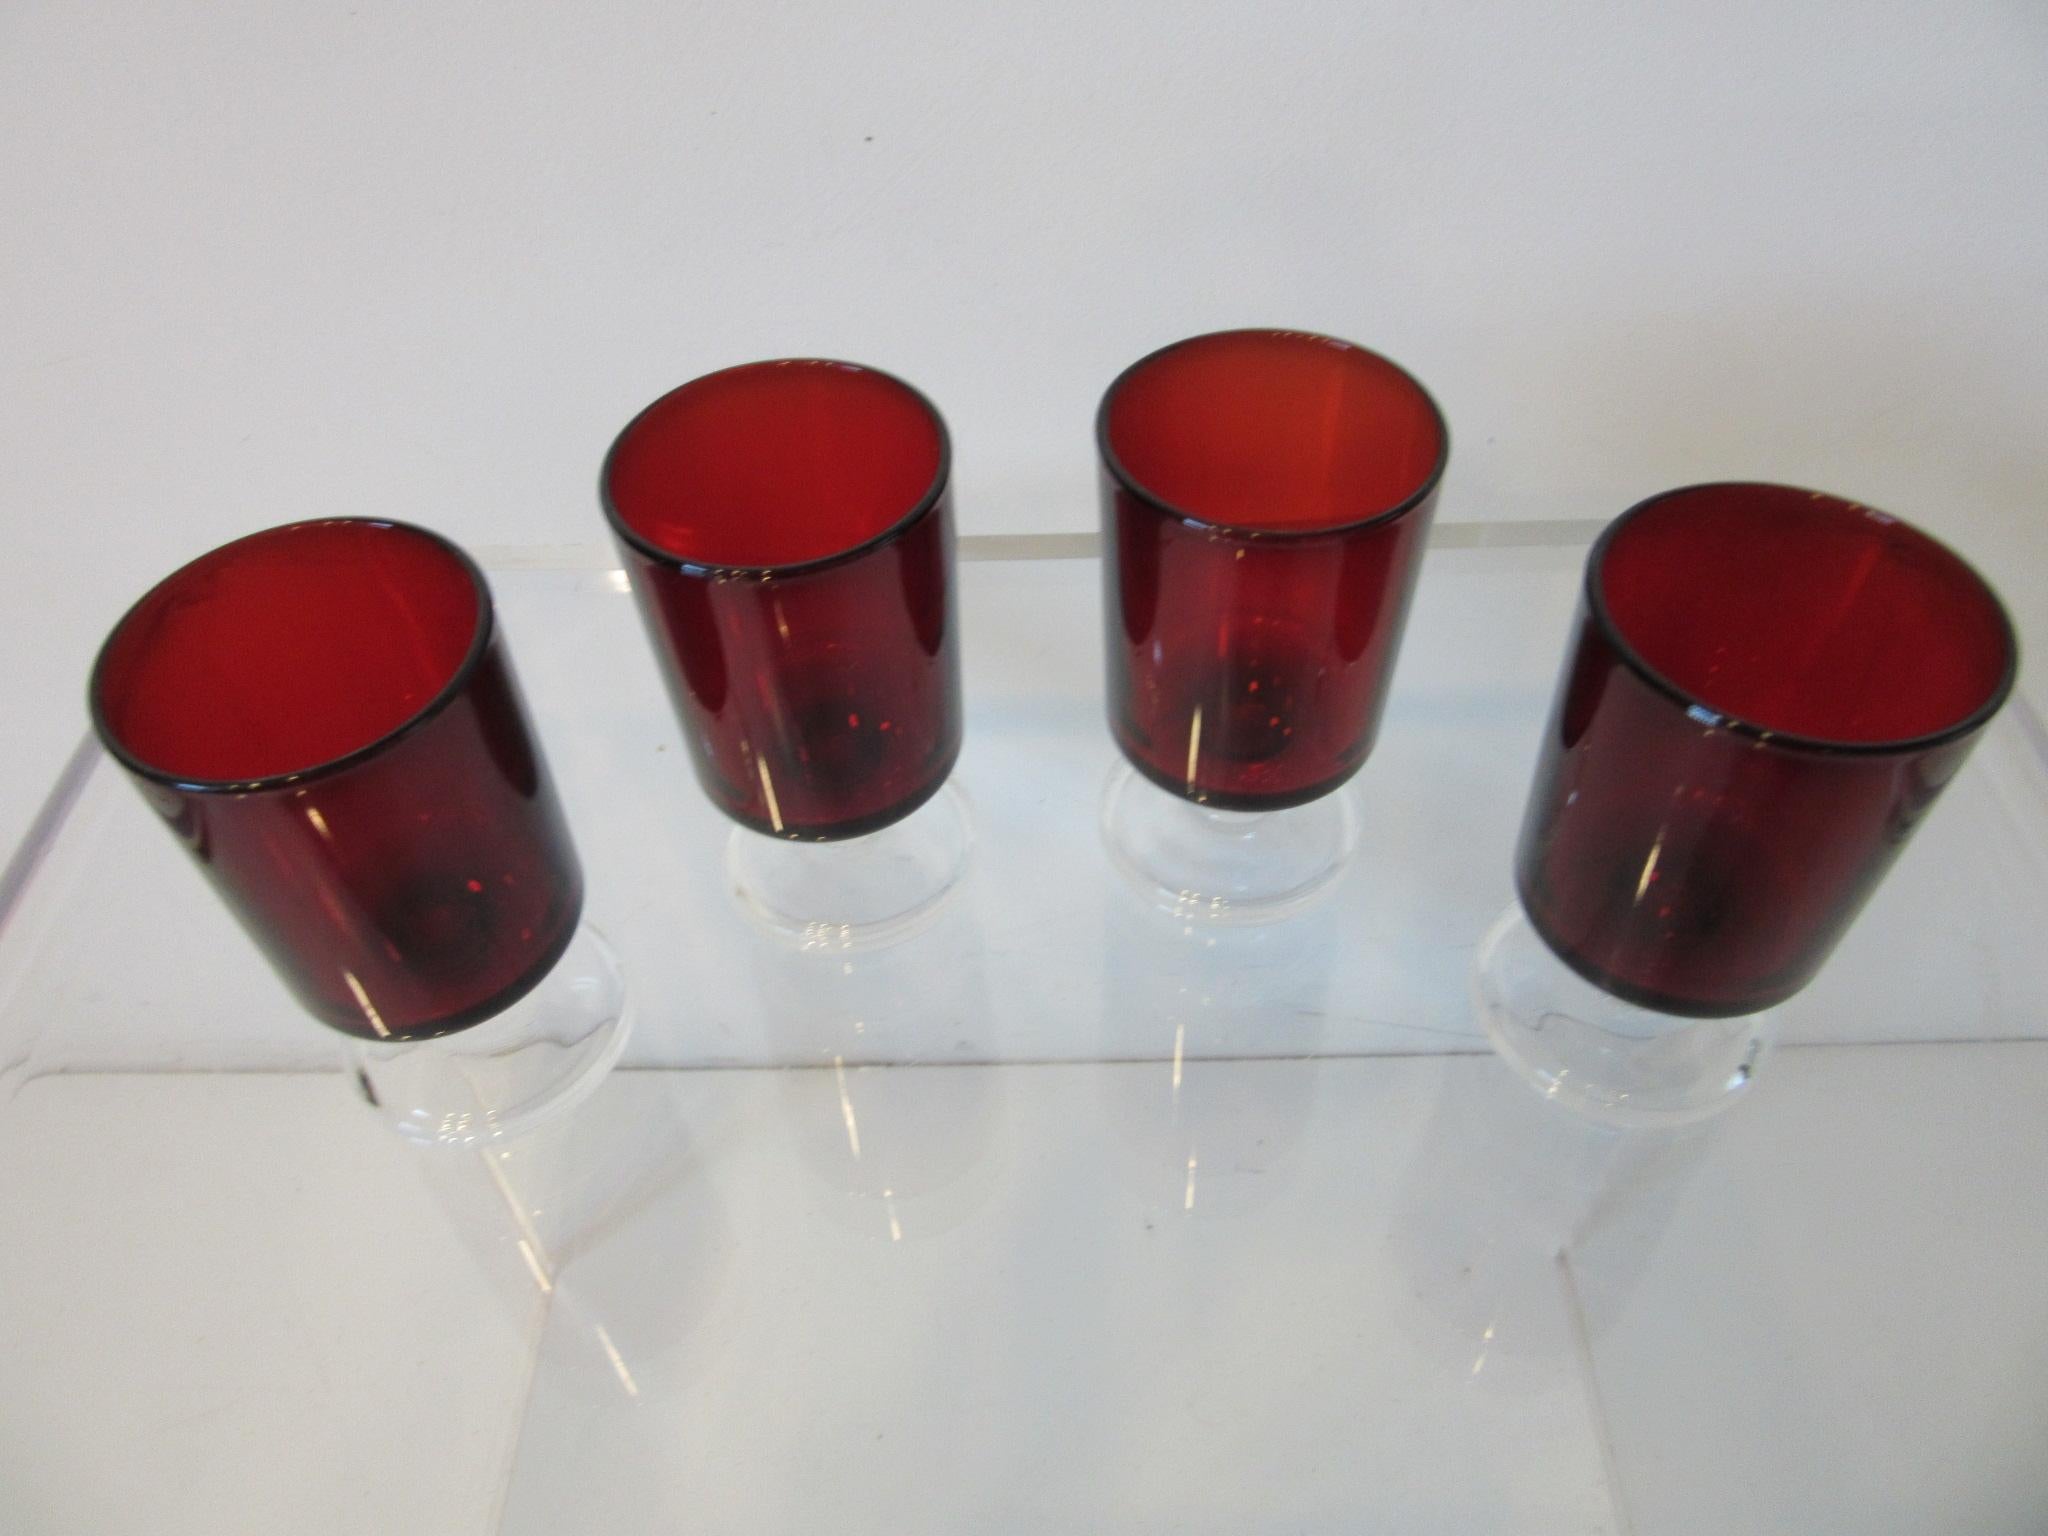 A set of four Arcoroc clear stemmed deep ruby red cordial glasses perfect to complete that cocktail shaker set or for your bar area. Stamped made in France to the bottom of the glasses and designed by J.G Durand, nicely weighted and has that